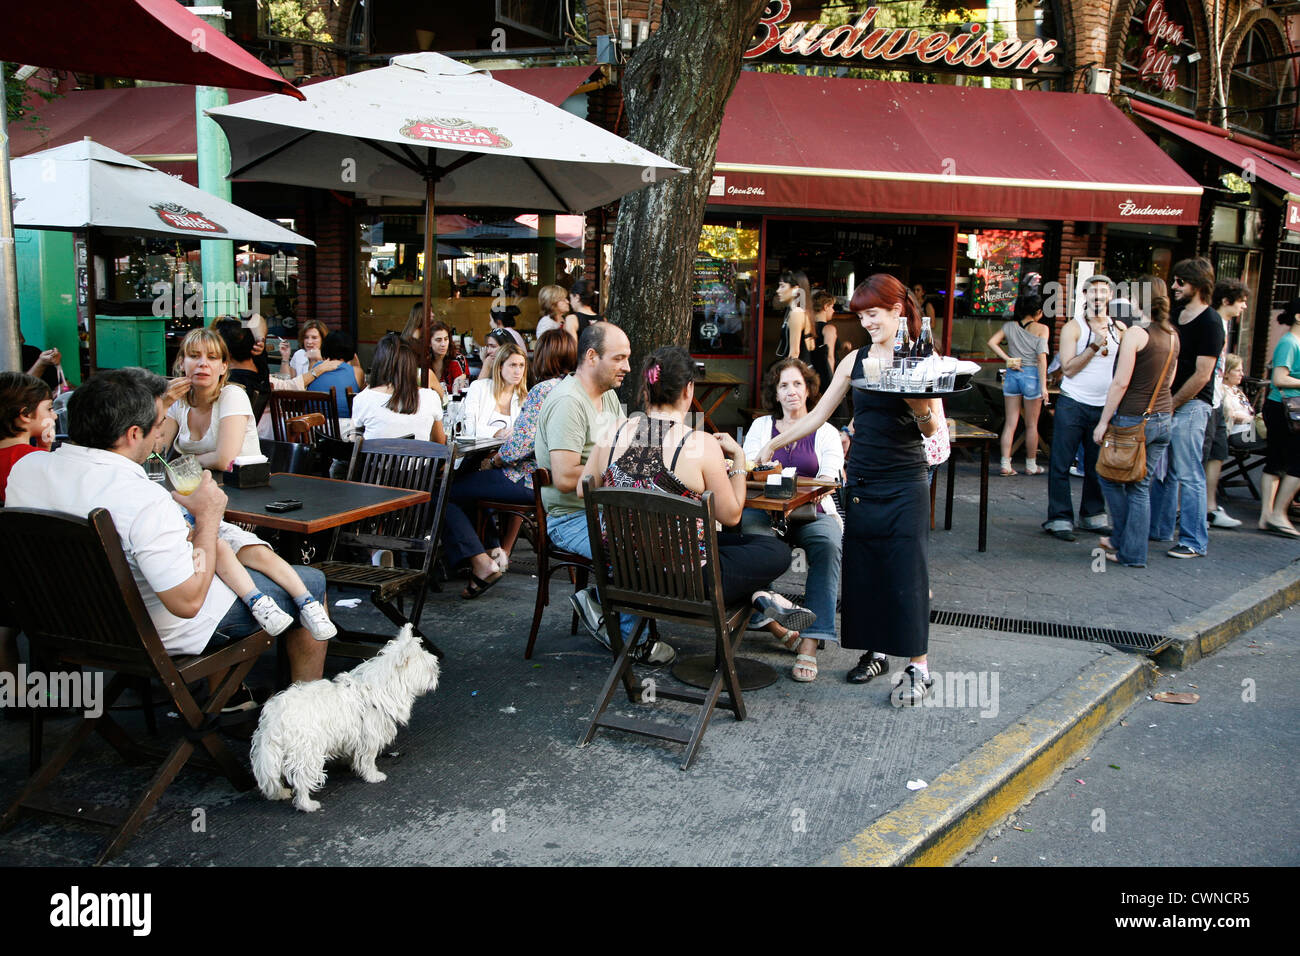 People sitting at an outdoors cafe at Plaza Serrano in Palermo Soho, Buenos Aires, Argentina. Stock Photo